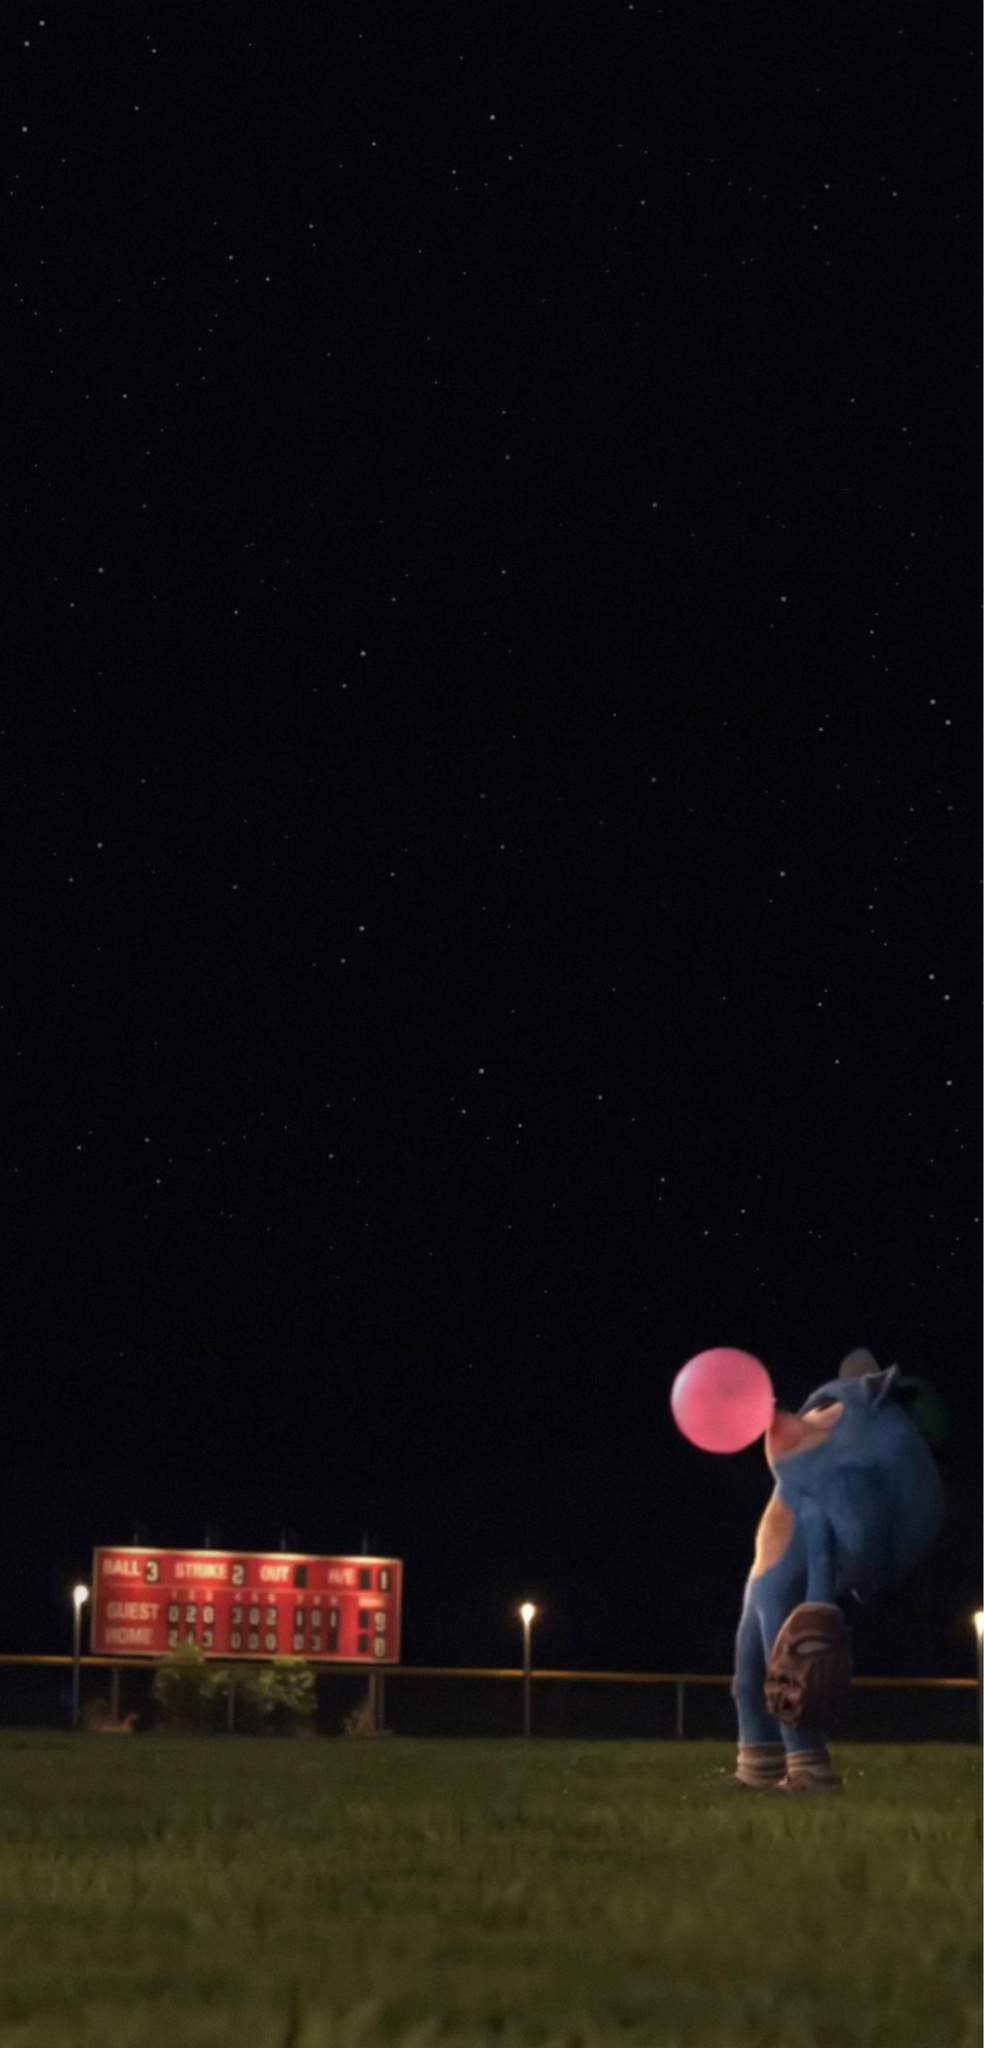 IPhone wallpaper of a man with a red balloon in the night sky - Sonic